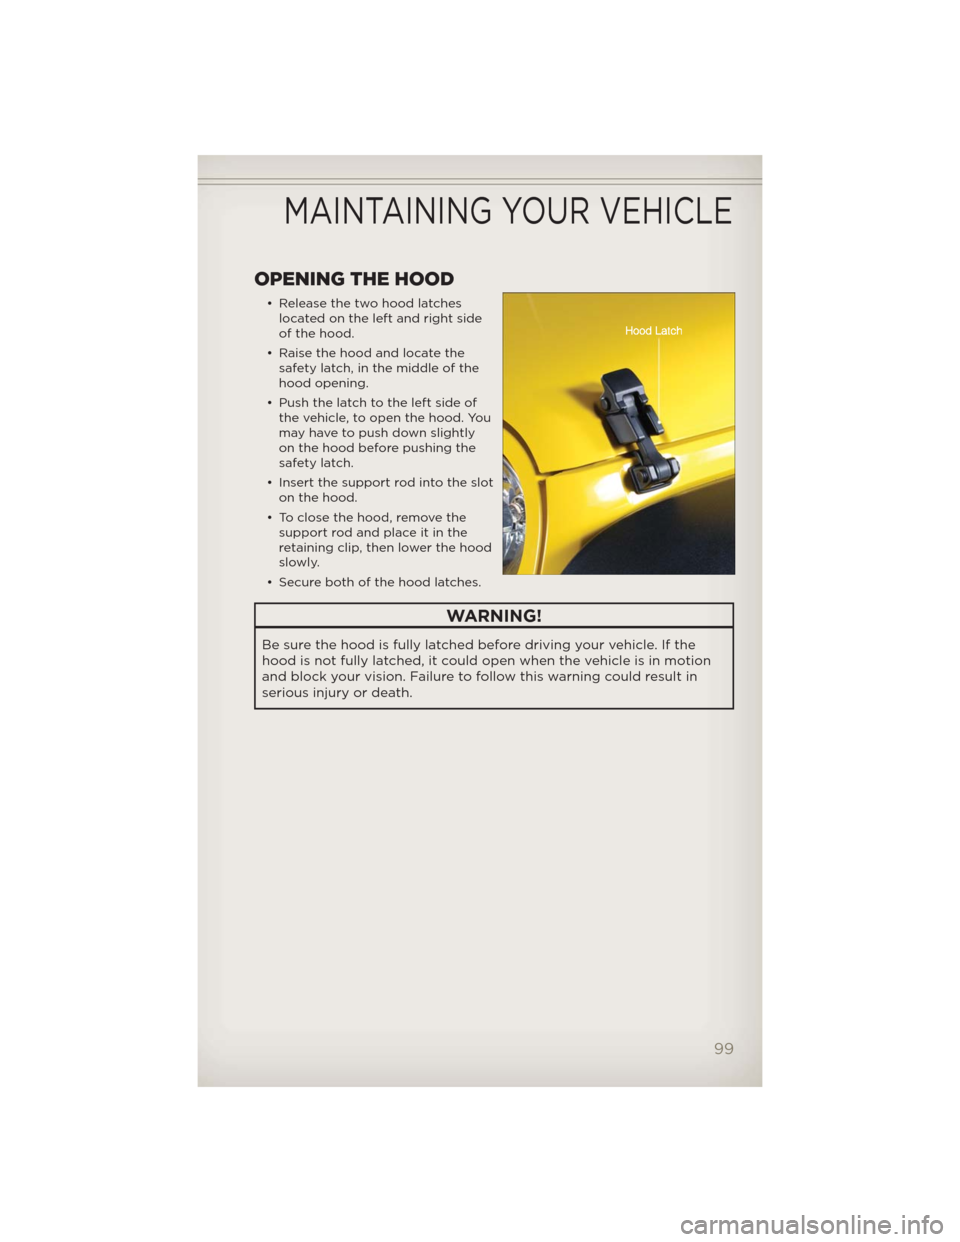 JEEP WRANGLER 2012 JK / 3.G User Guide OPENING THE HOOD
• Release the two hood latches
located on the left and right side
of the hood.
• Raise the hood and locate the
safety latch, in the middle of the
hood opening.
• Push the latch 